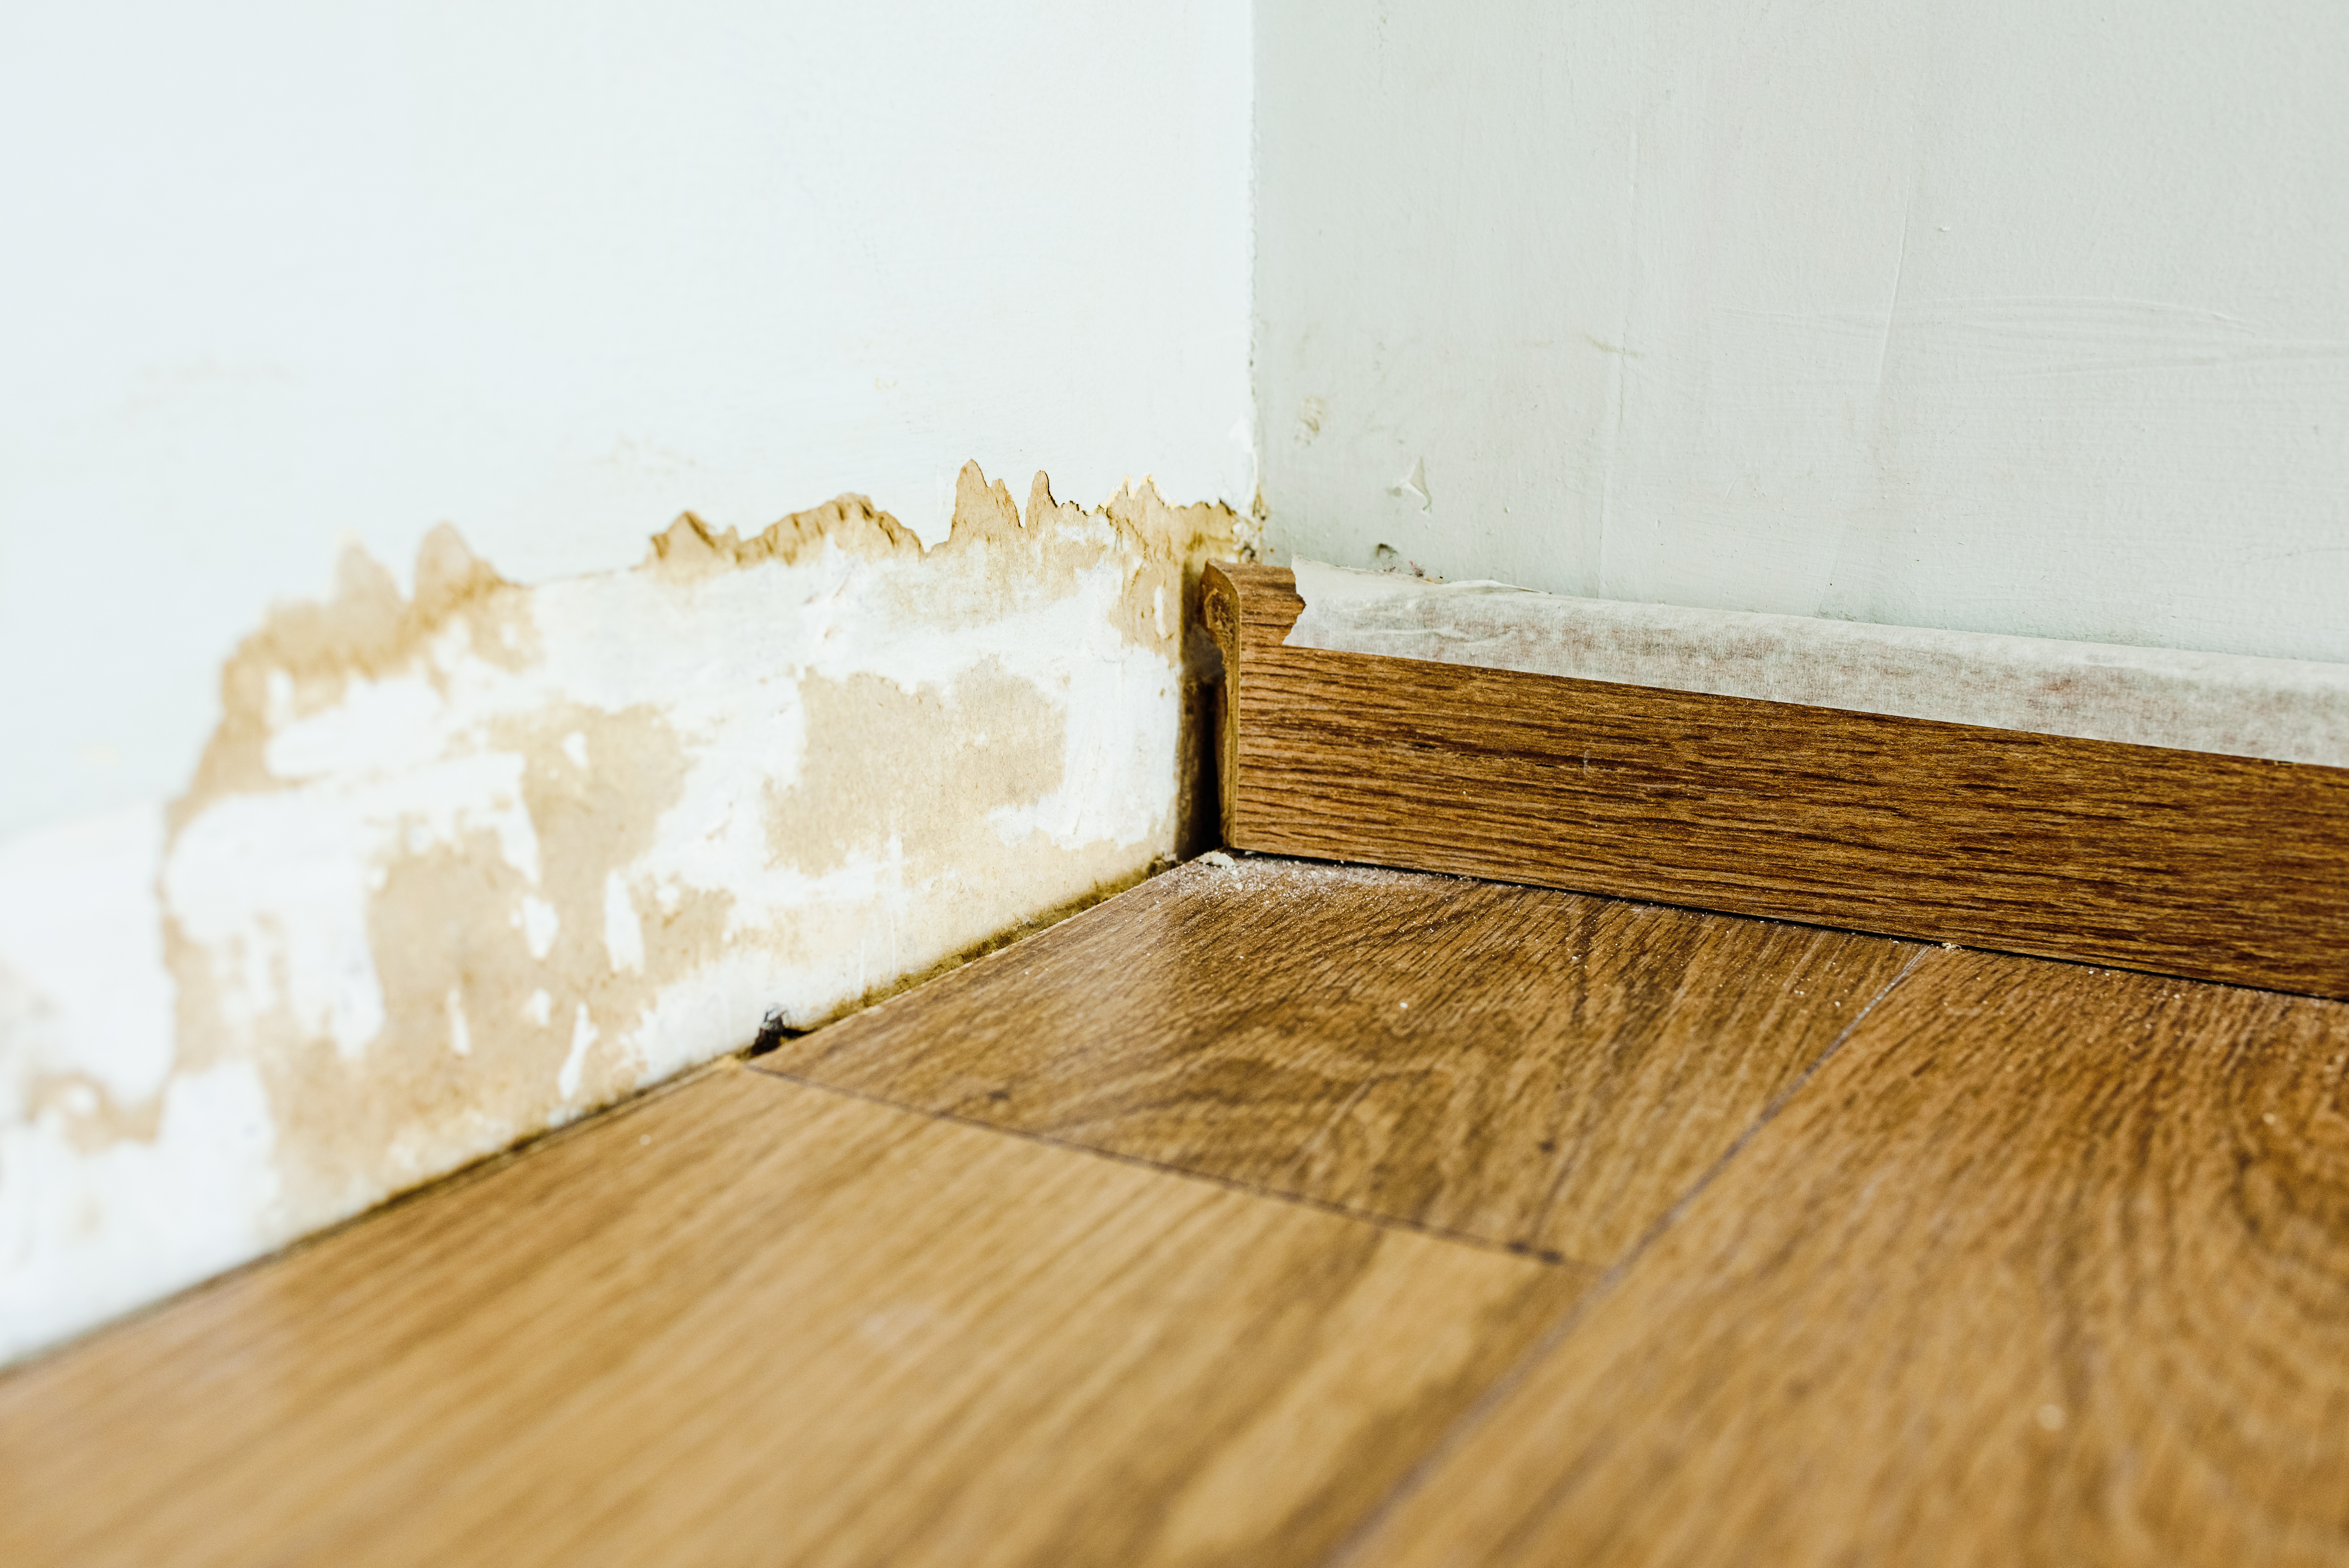 Baseboard stripping skirting board on a wall damaged by mold 2023 11 27 05 04 24 utc
